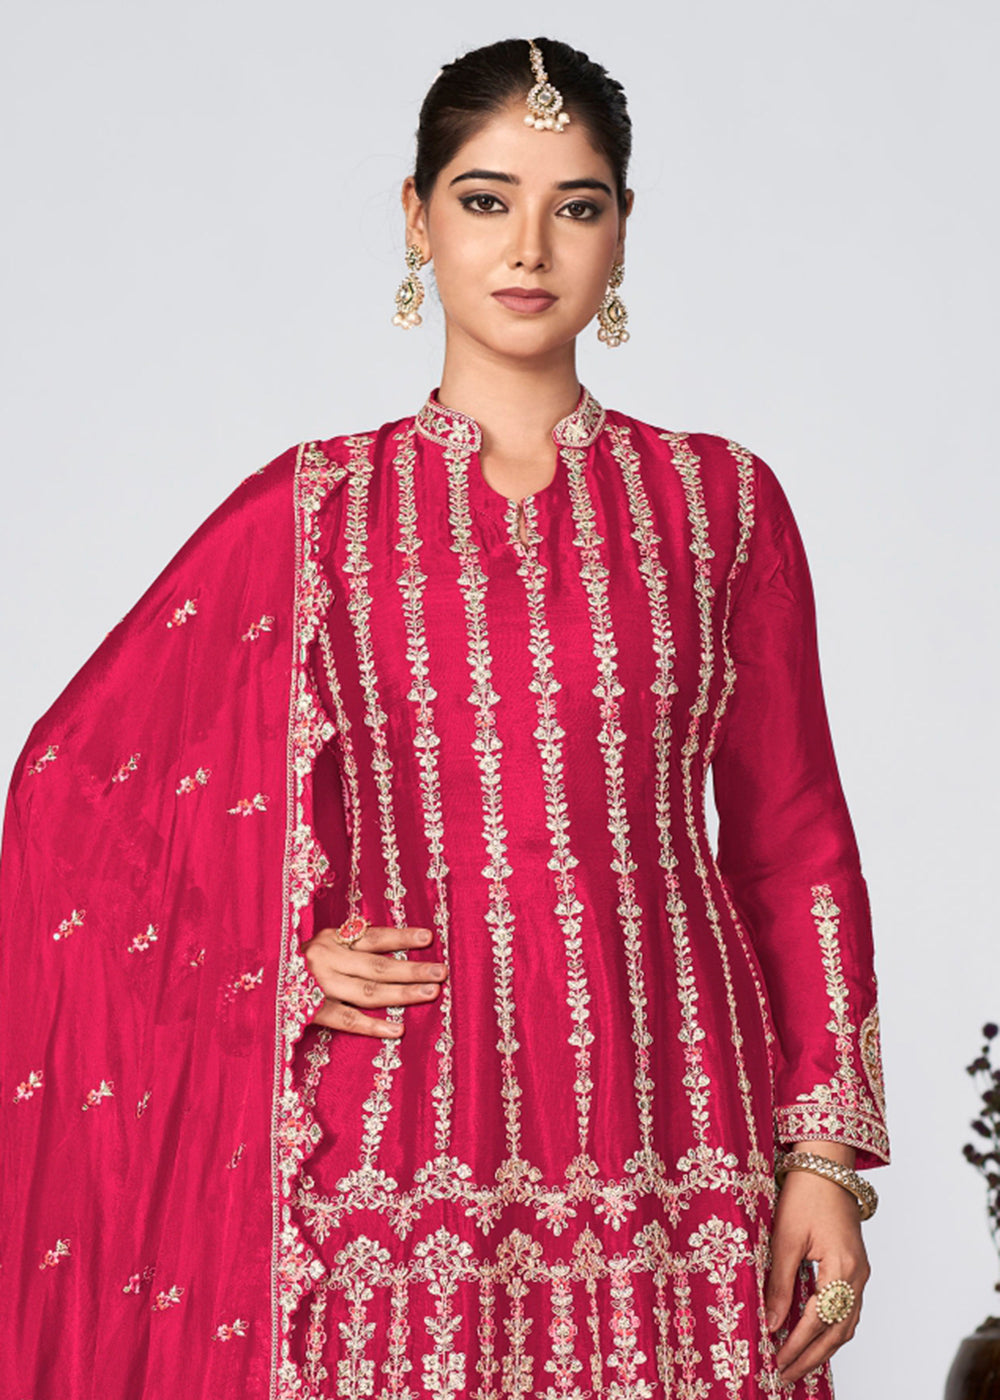 Buy Now Pink Heavy Chinnon Embroidered Festive Palazzo Suit Online in USA, UK, Canada, Germany, Australia & Worldwide at Empress Clothing.